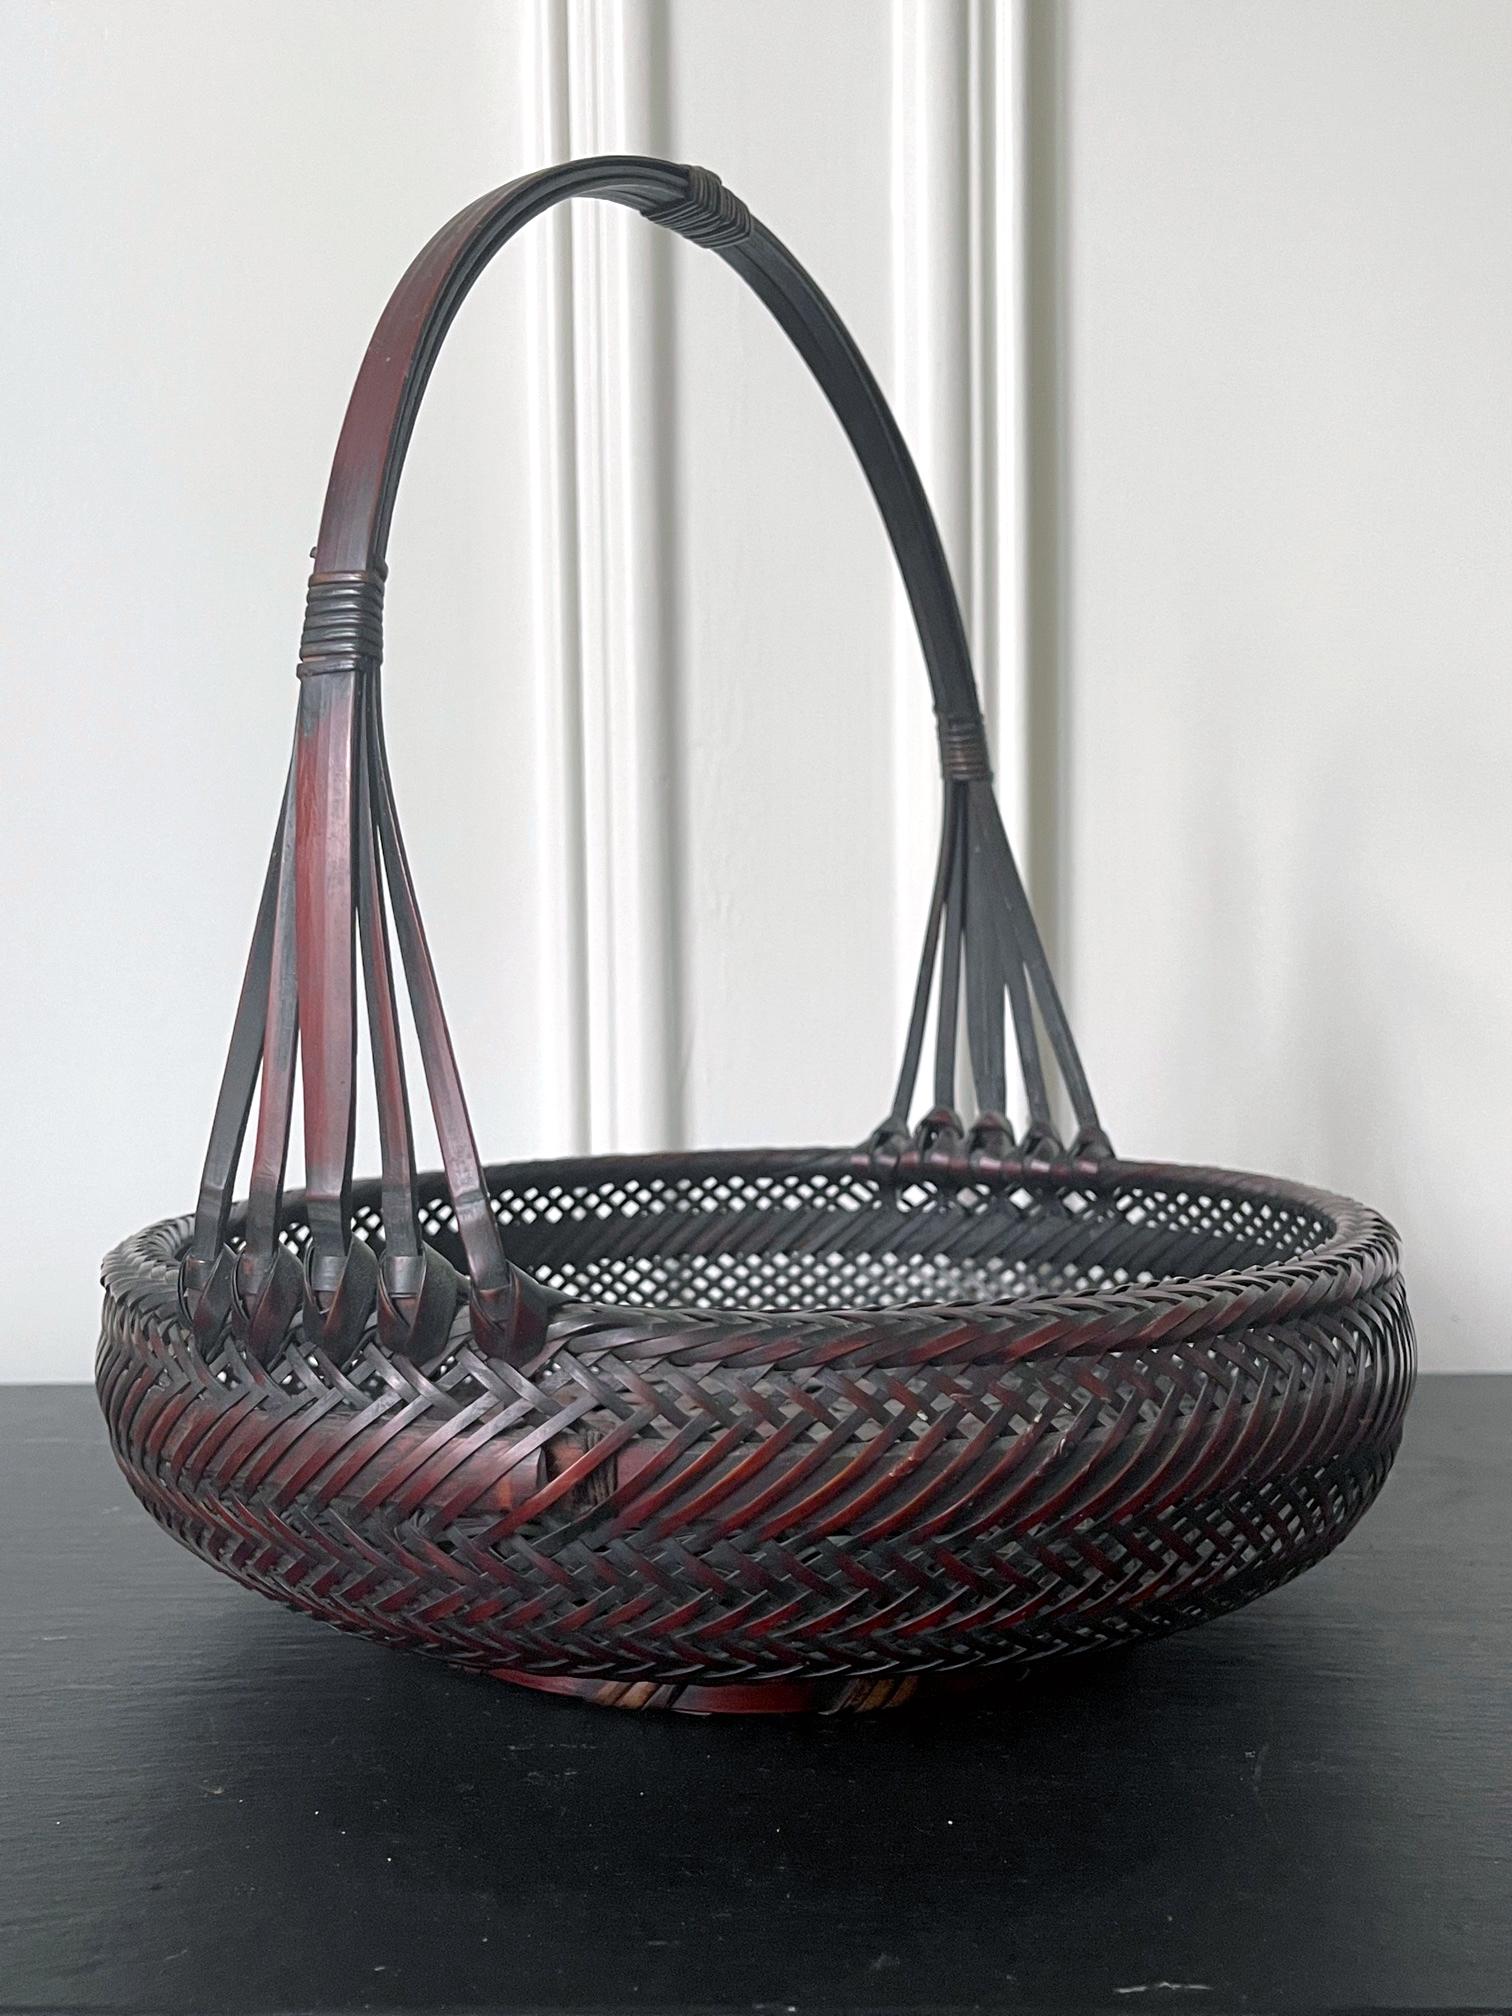 A Japanese woven bamboo basket with handle from early 20th century, circa end of Meiji to Taisho period. The basket was constructed in the form of a morikago. a shallow and open basket with handle. Traditionally, a morikago was used to display